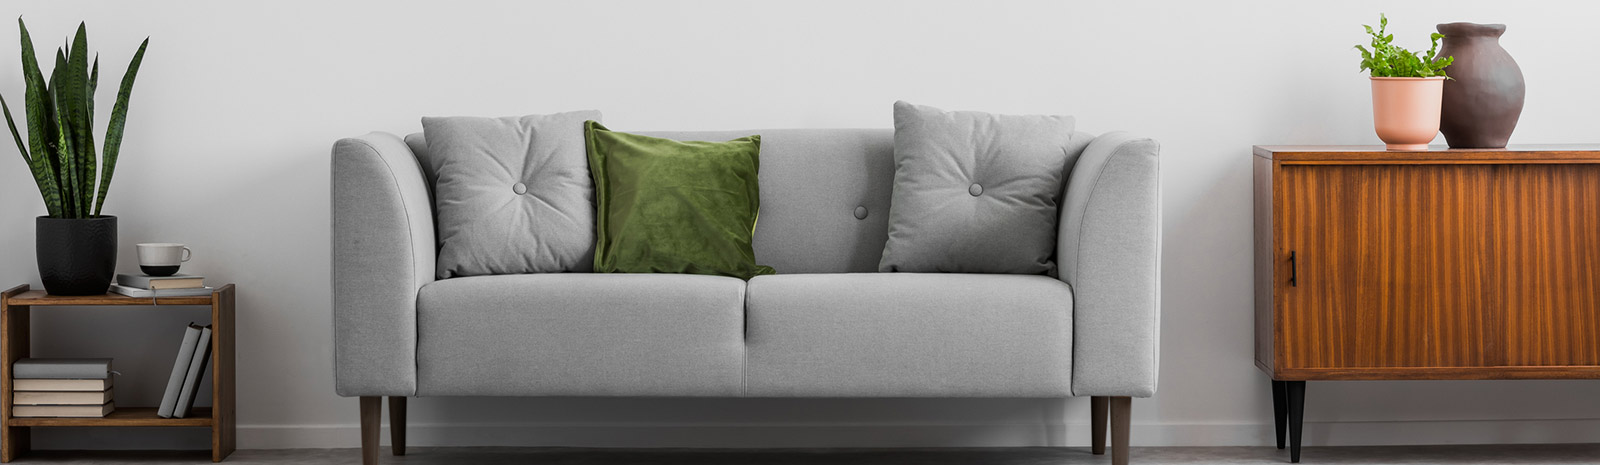 couch in a living room